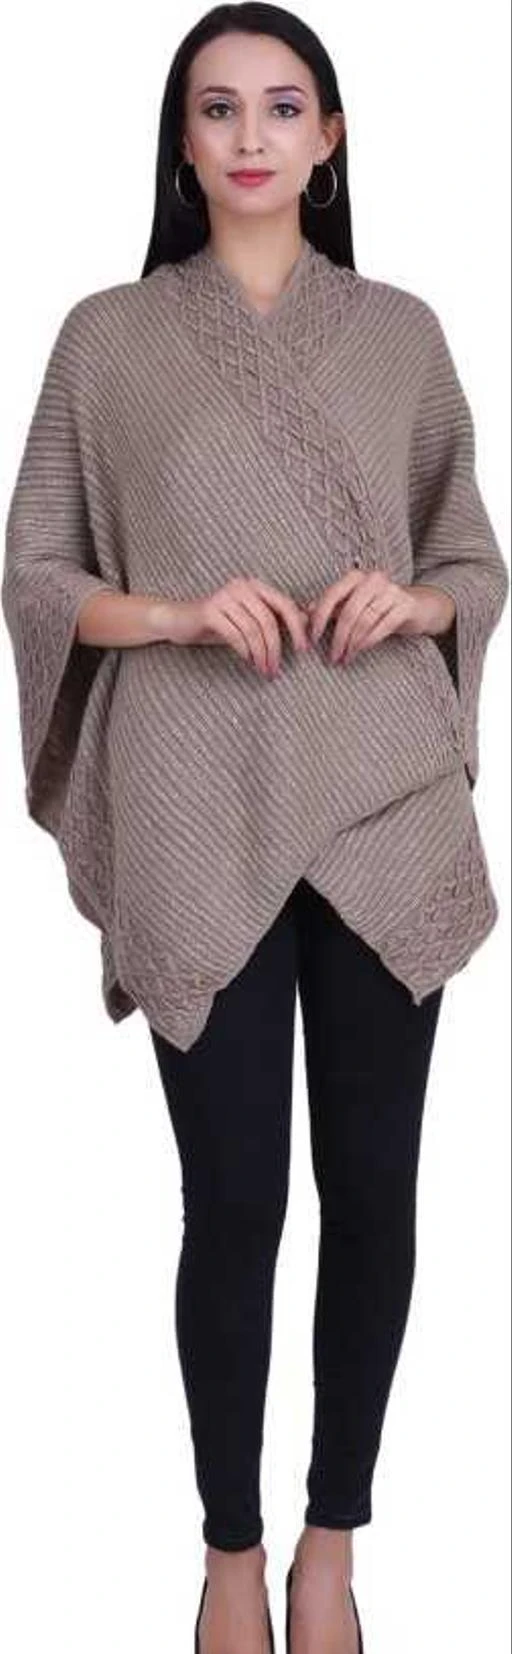 Checkout this latest Capes, Shrugs & Ponchos
Product Name: *Comfy Fabulous Women Capes, Shrugs & Ponchos*
Fabric: Wool
Sleeve Length: Three-Quarter Sleeves
Fit/ Shape: Poncho
Pattern: Solid
Net Quantity (N): 1
Sizes:
Free Size (Bust Size: 40 in, Length Size: 30 in) 
Country of Origin: India
Easy Returns Available In Case Of Any Issue


SKU: LS-109_BROWN
Supplier Name: ICABLE

Code: 938-13746737-9282

Catalog Name: ICABLE Pretty Glamorous Women Capes  Shrugs & Ponchos
CatalogID_2709519
M04-C07-SC1024